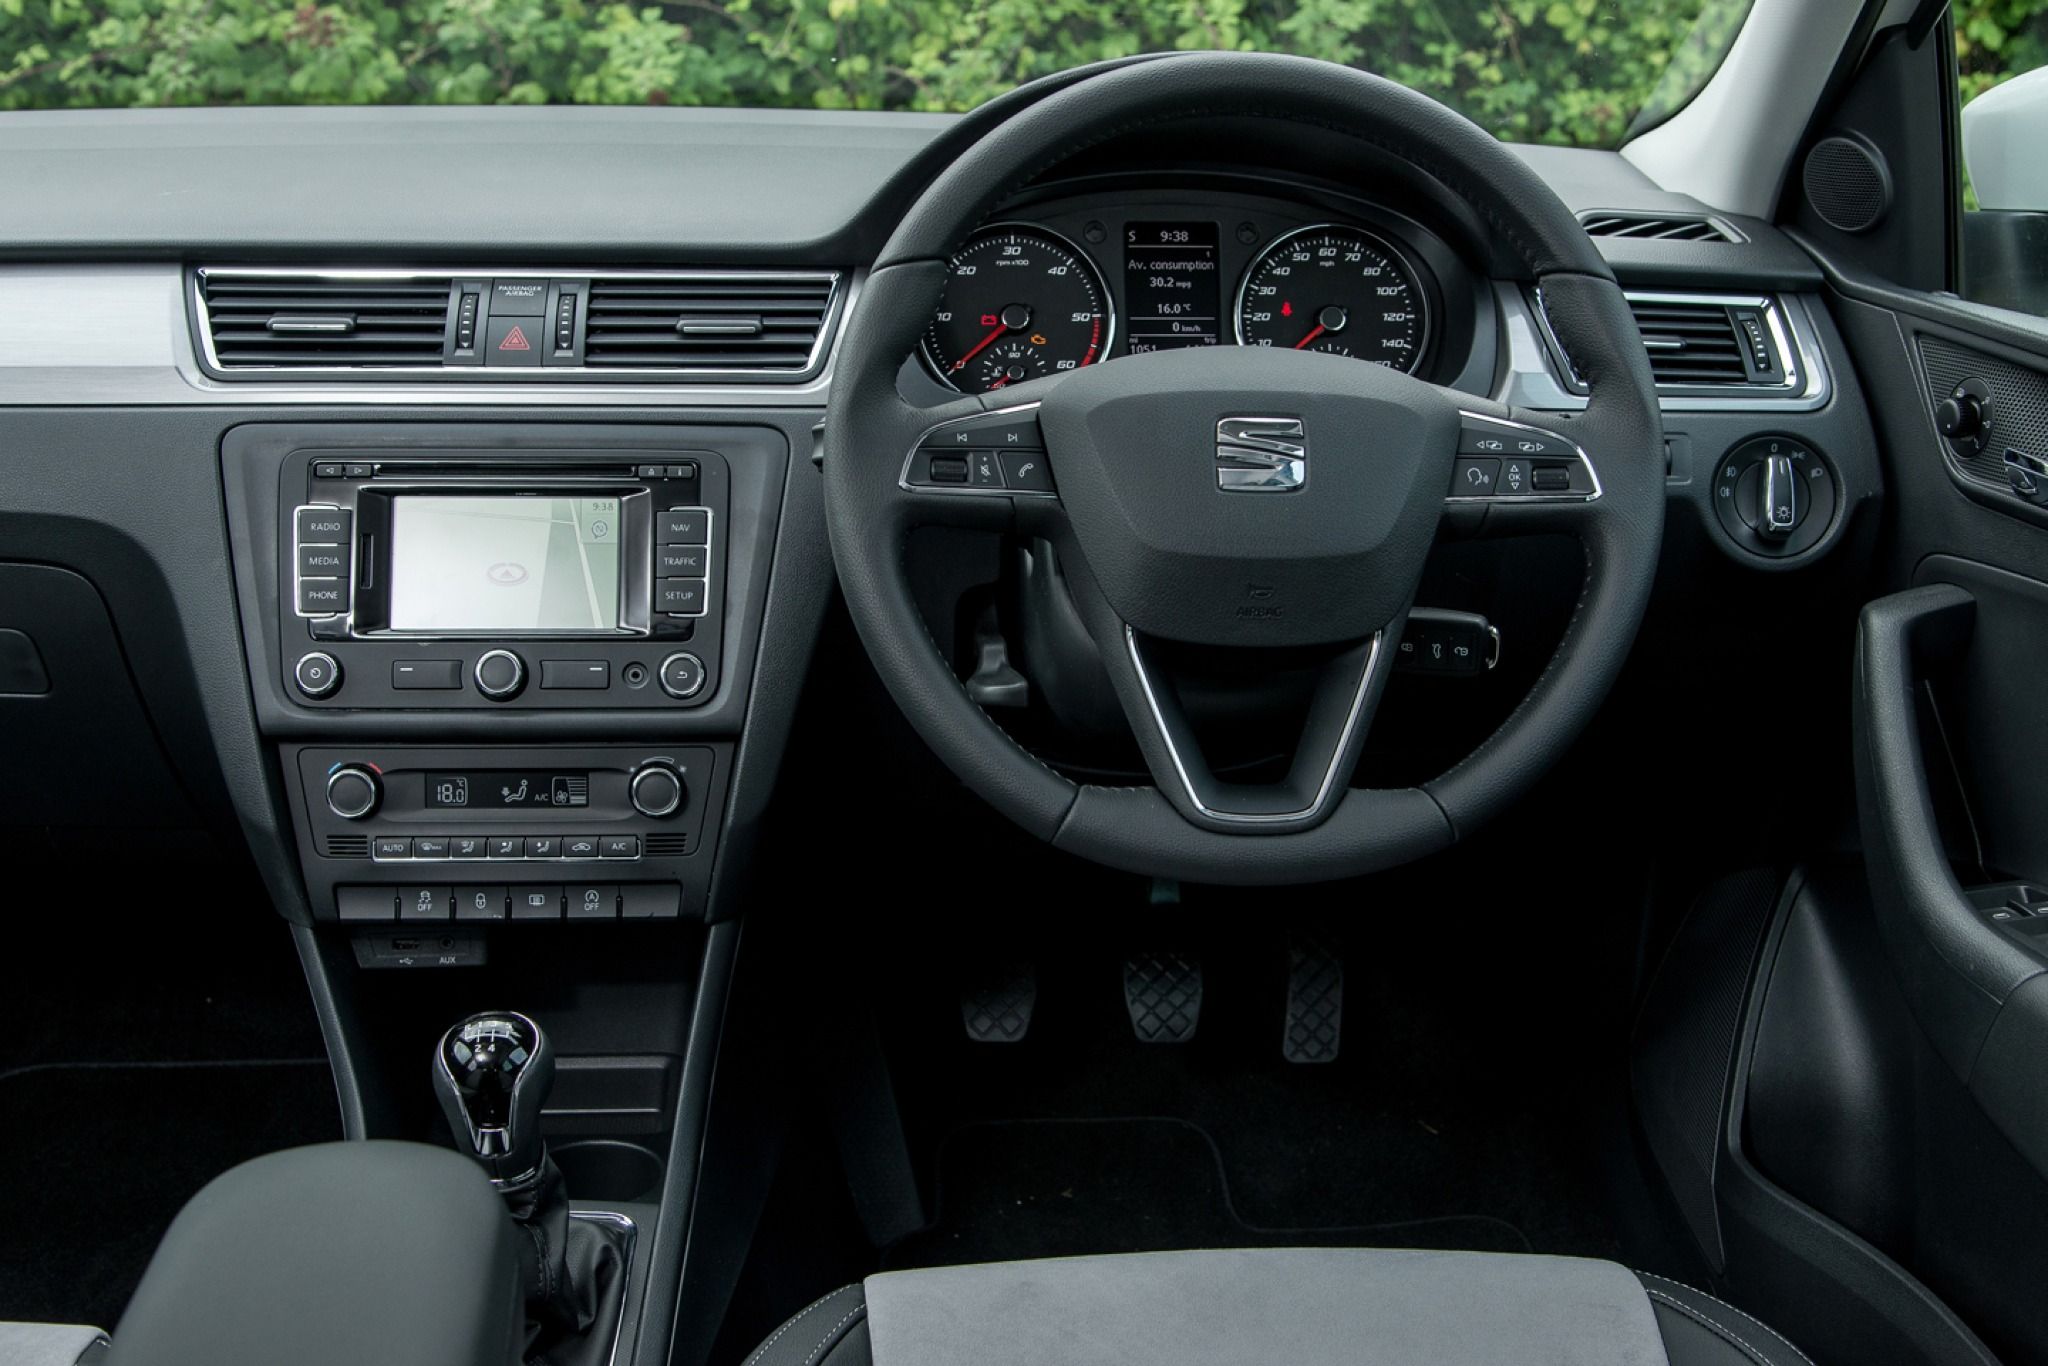 Steering wheel and dashboard of a SEAT Toledo